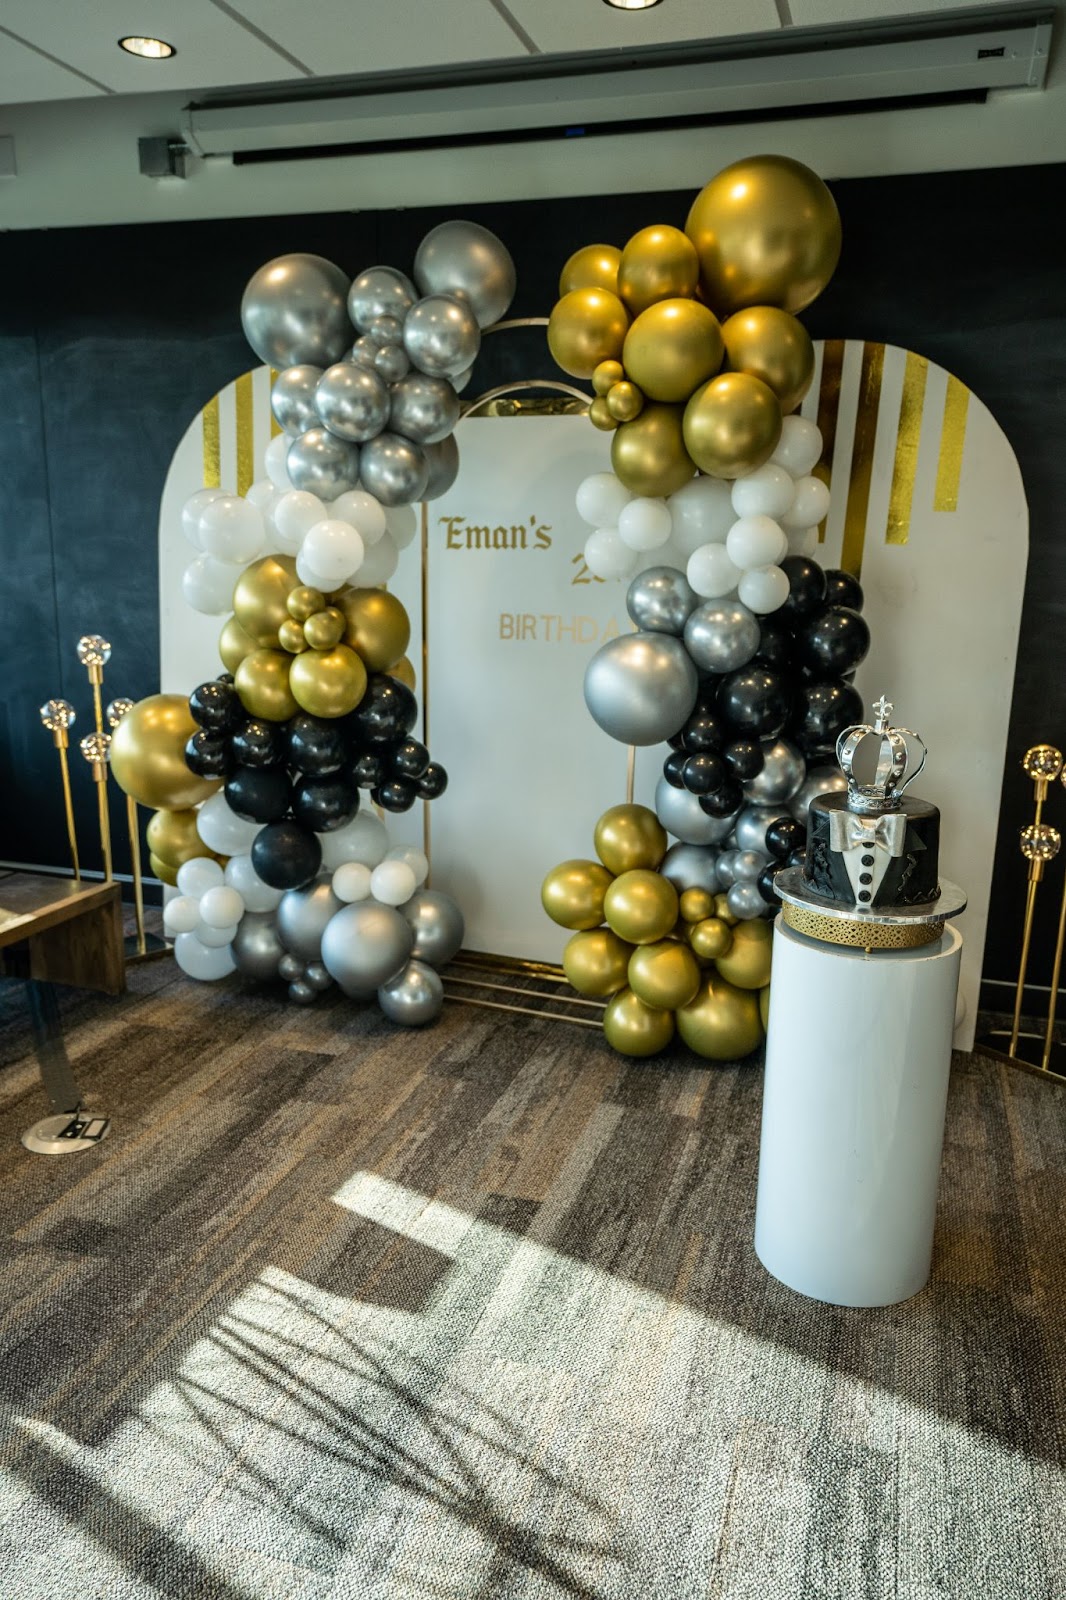 An event space decorated for a birthday celebration, with a lavish balloon arch in shades of black, gold, silver, and white balloons. The focal point is a backdrop with 'eman's birthday' printed on it, framed by the balloon arrangement. A stylish black and white birthday cake with a crown topper sits on a white pedestal in the foreground, adding a regal touch to the decor.